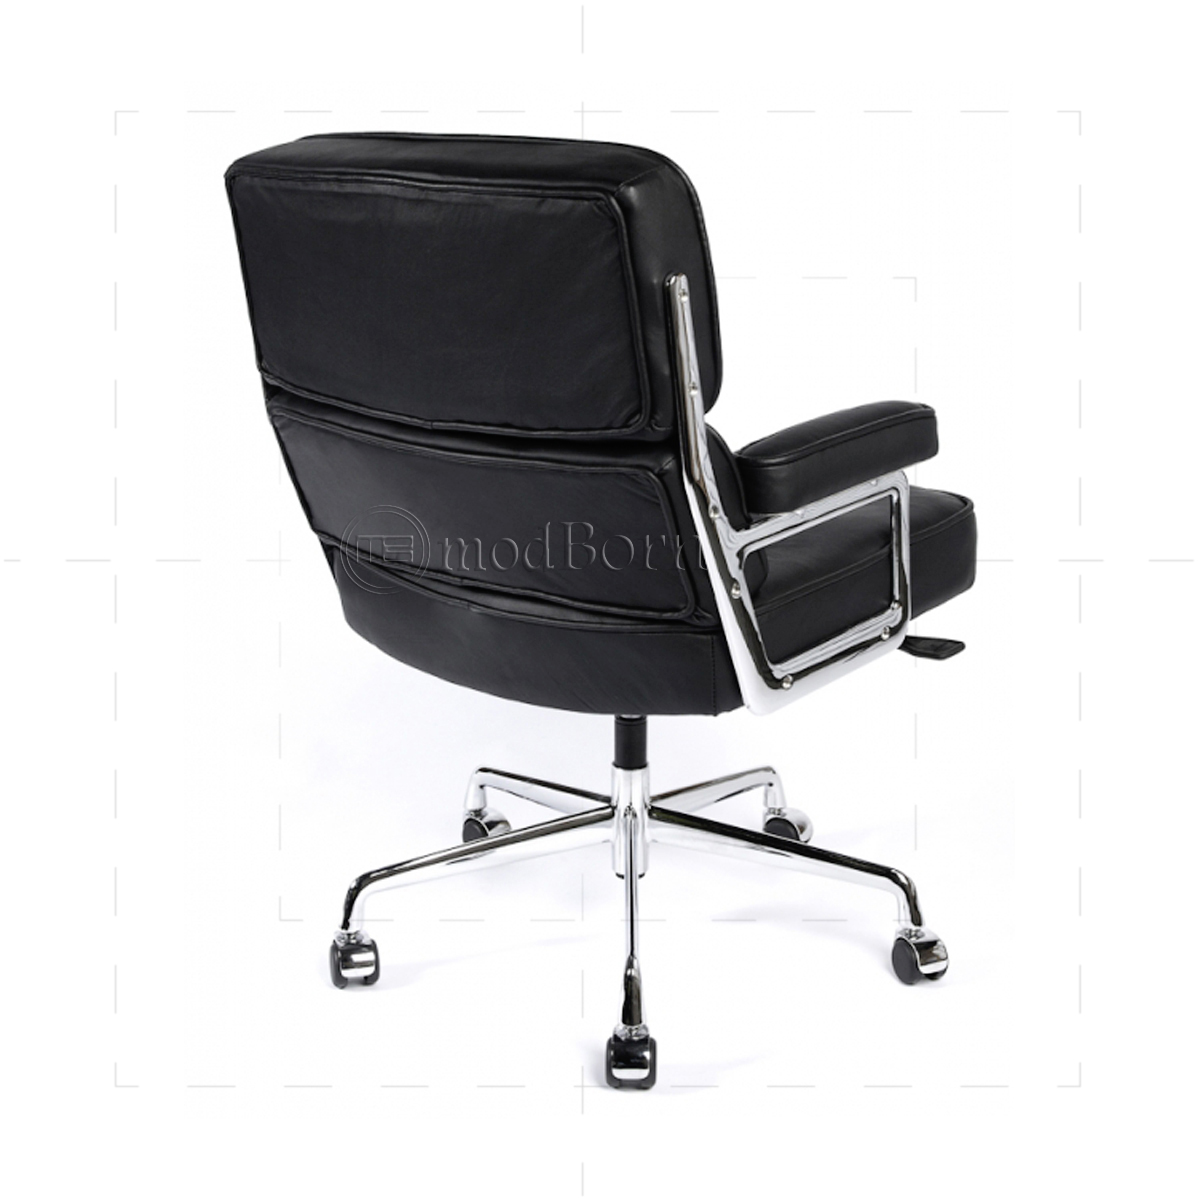 EA104 Eames Style Office Lobby Black Leather Executive Chair